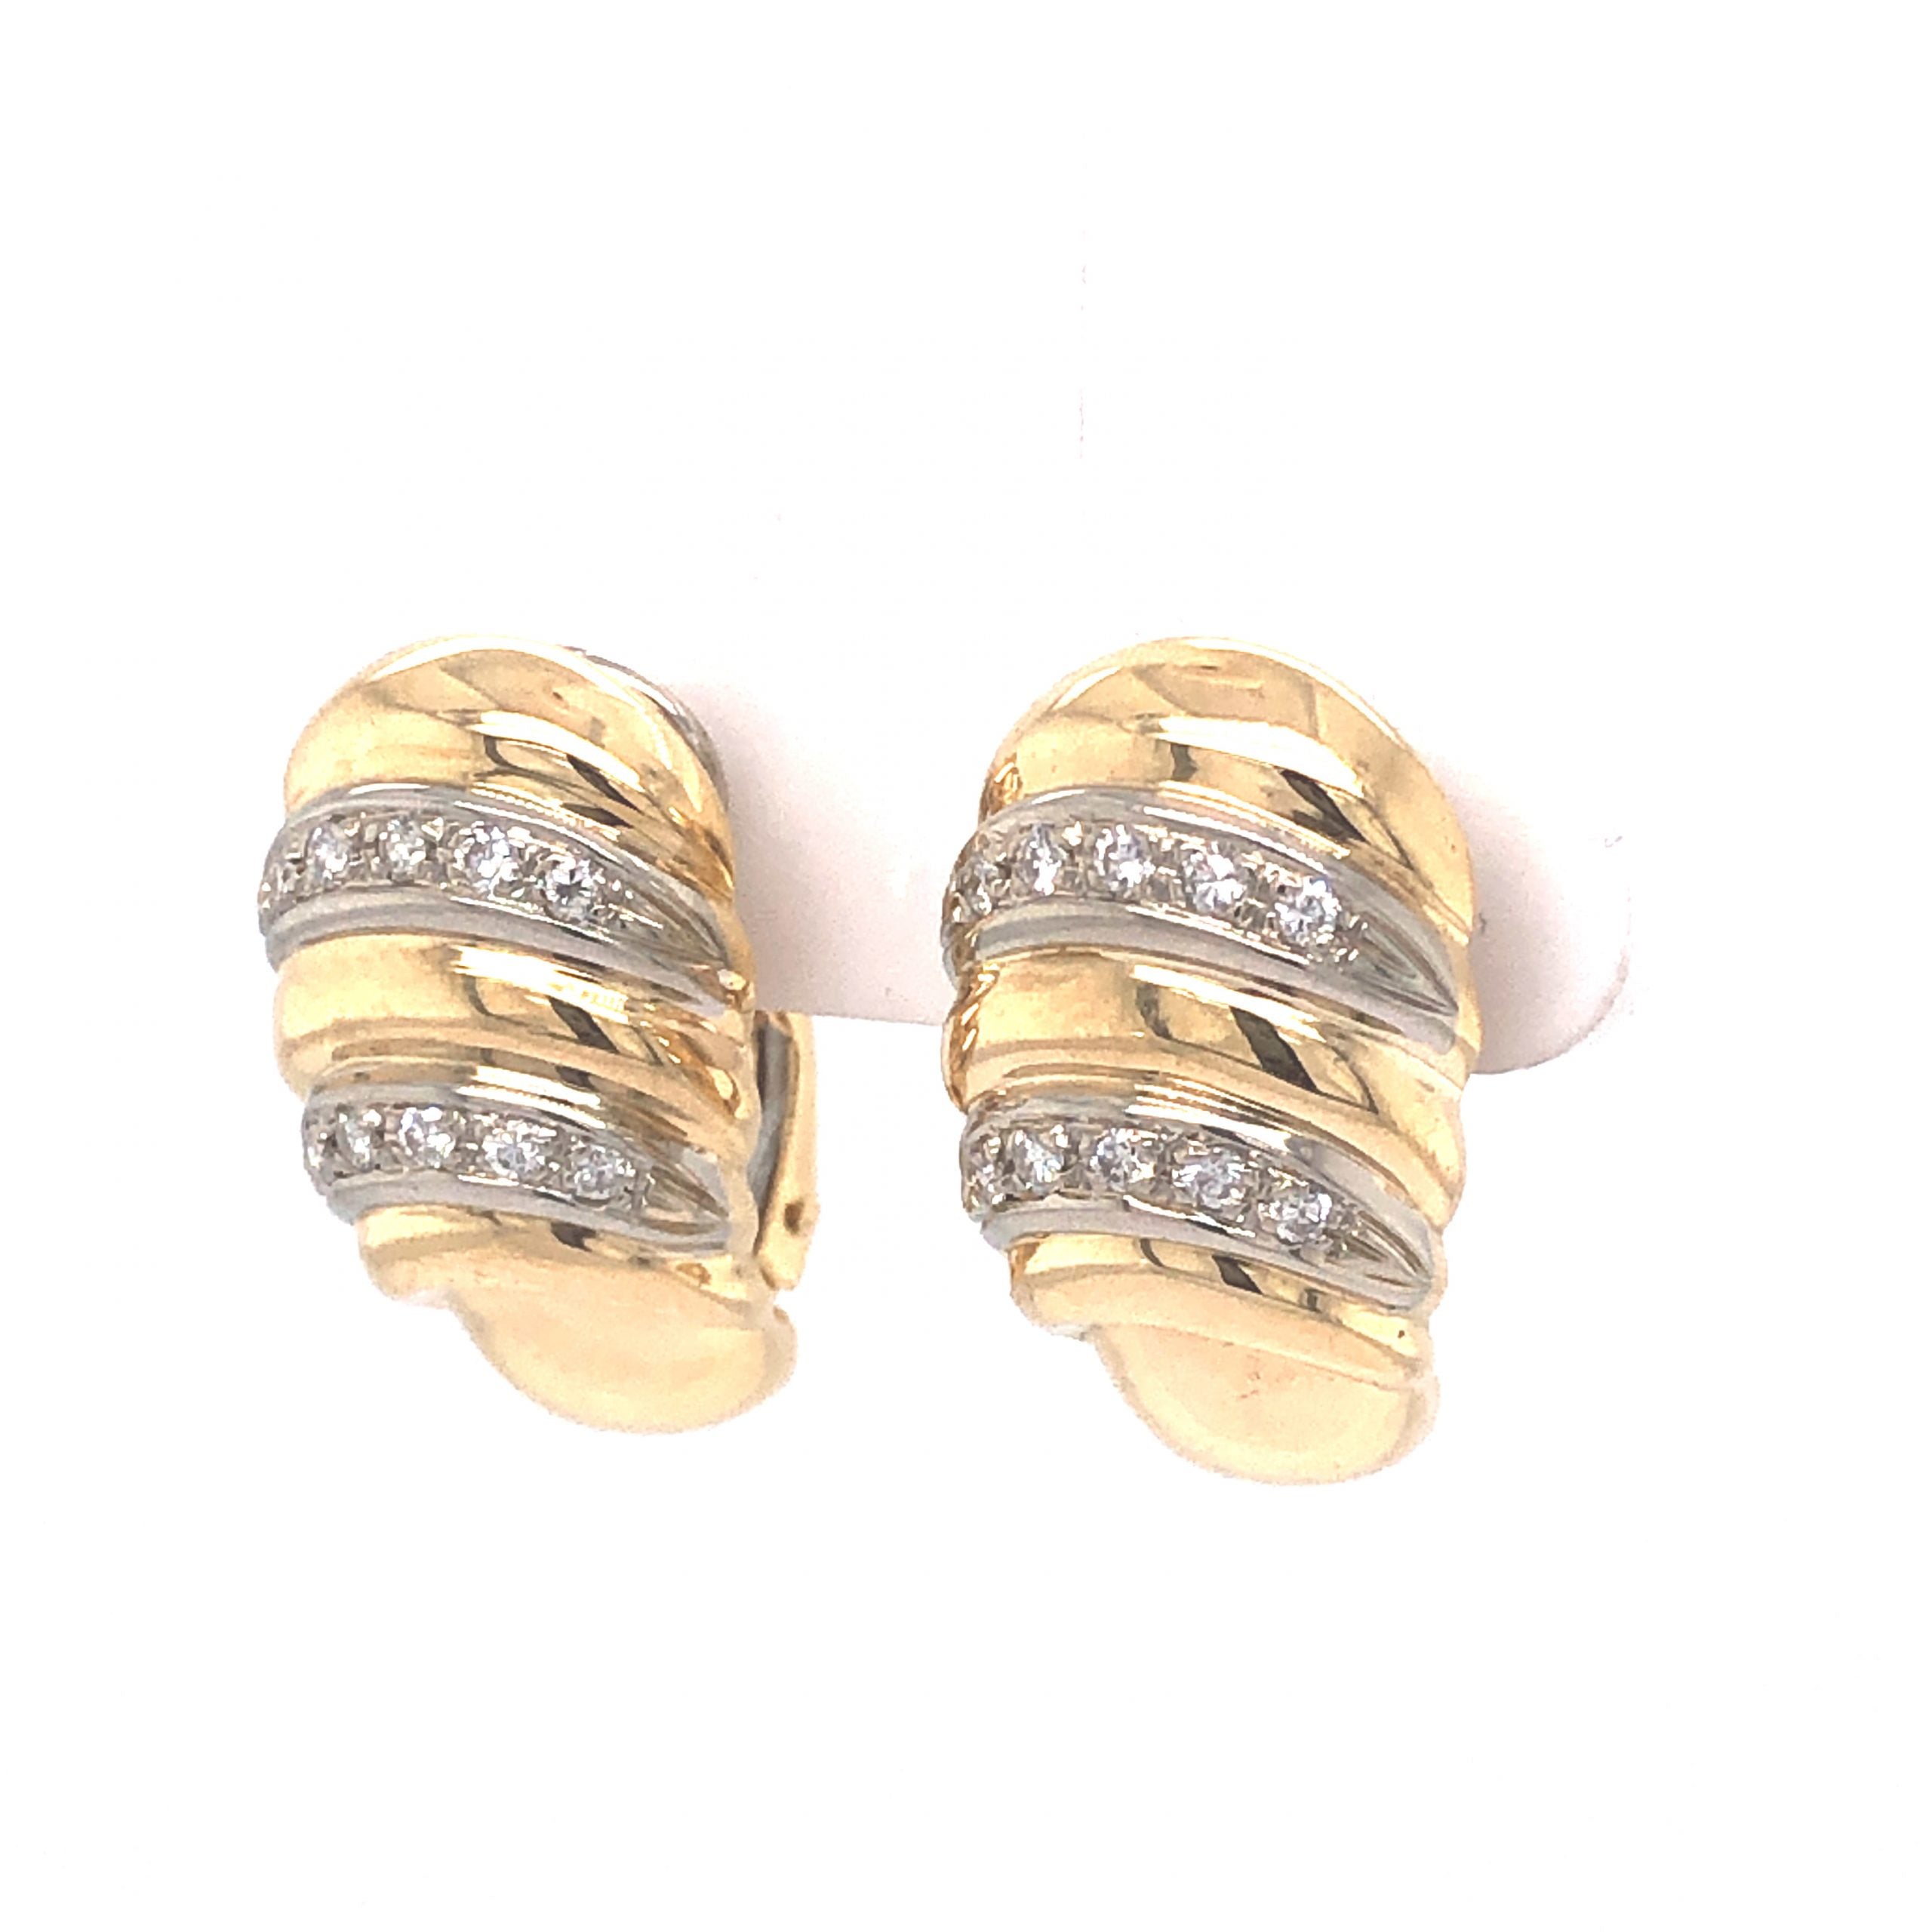 Solitaire White Diamond Studs Earrings in 14k Gold | Chordia Jewels